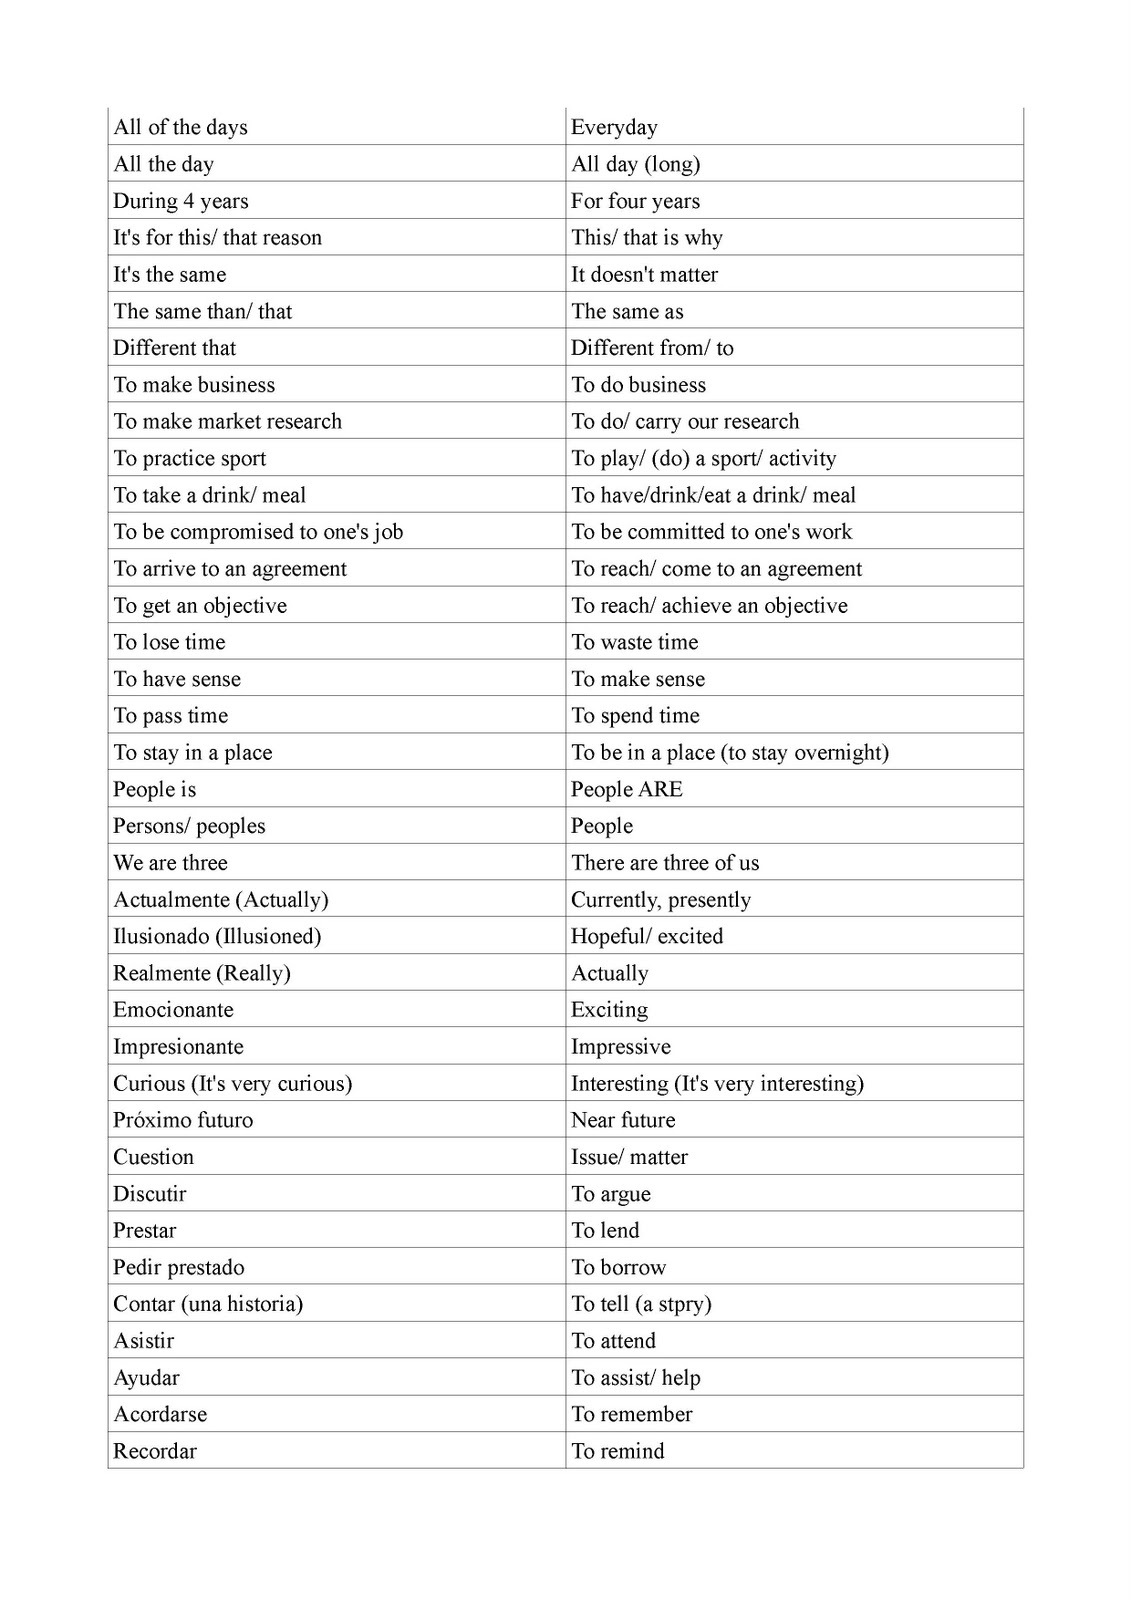 adjectives-in-english-and-in-spanish-worksheet-free-esl-printable